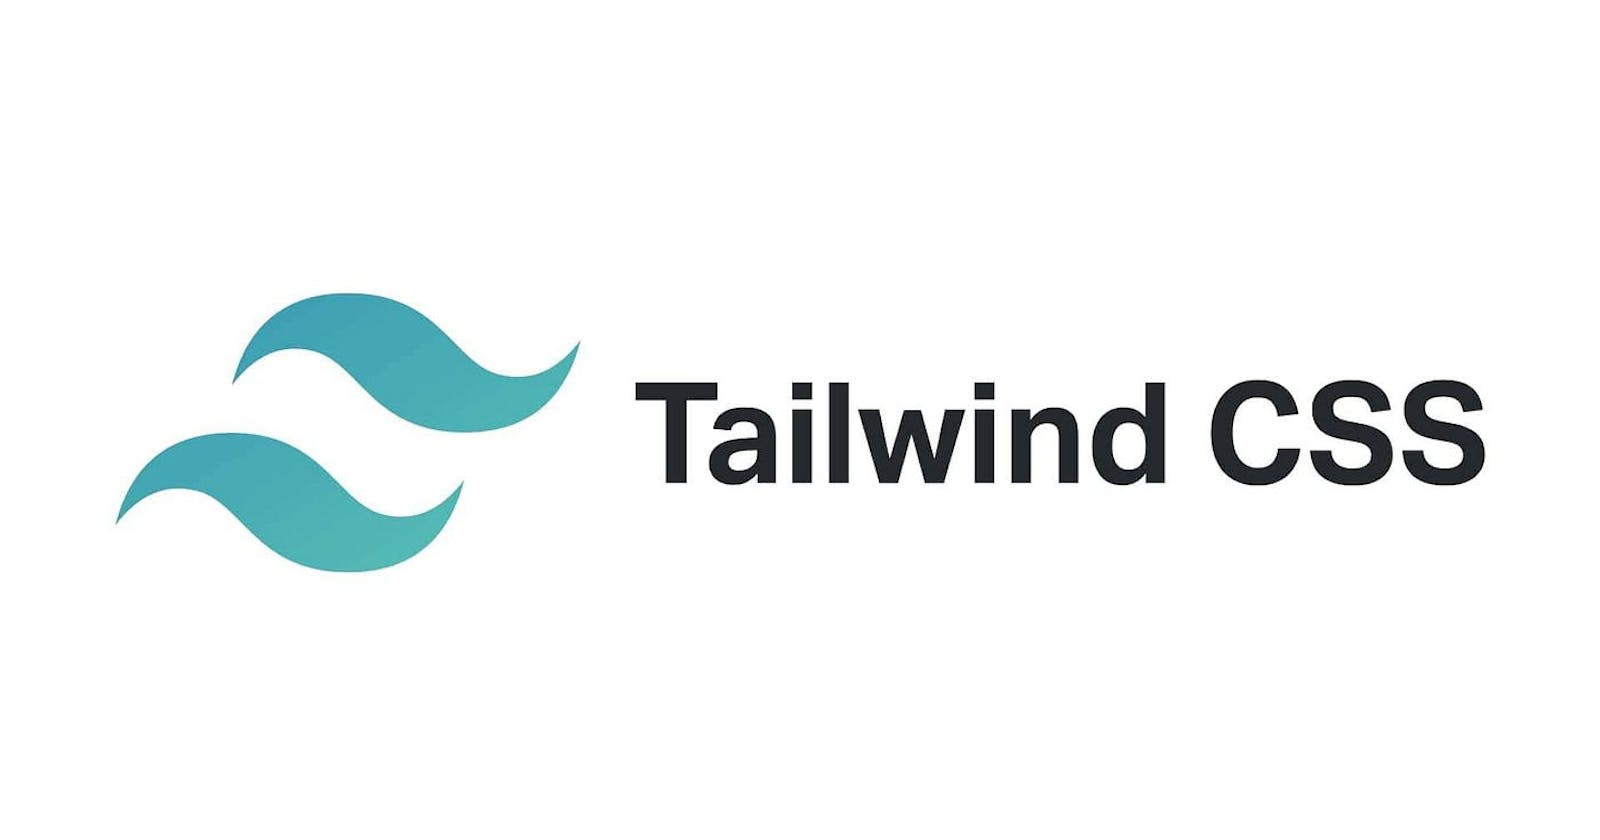 How to set up Tailwind?